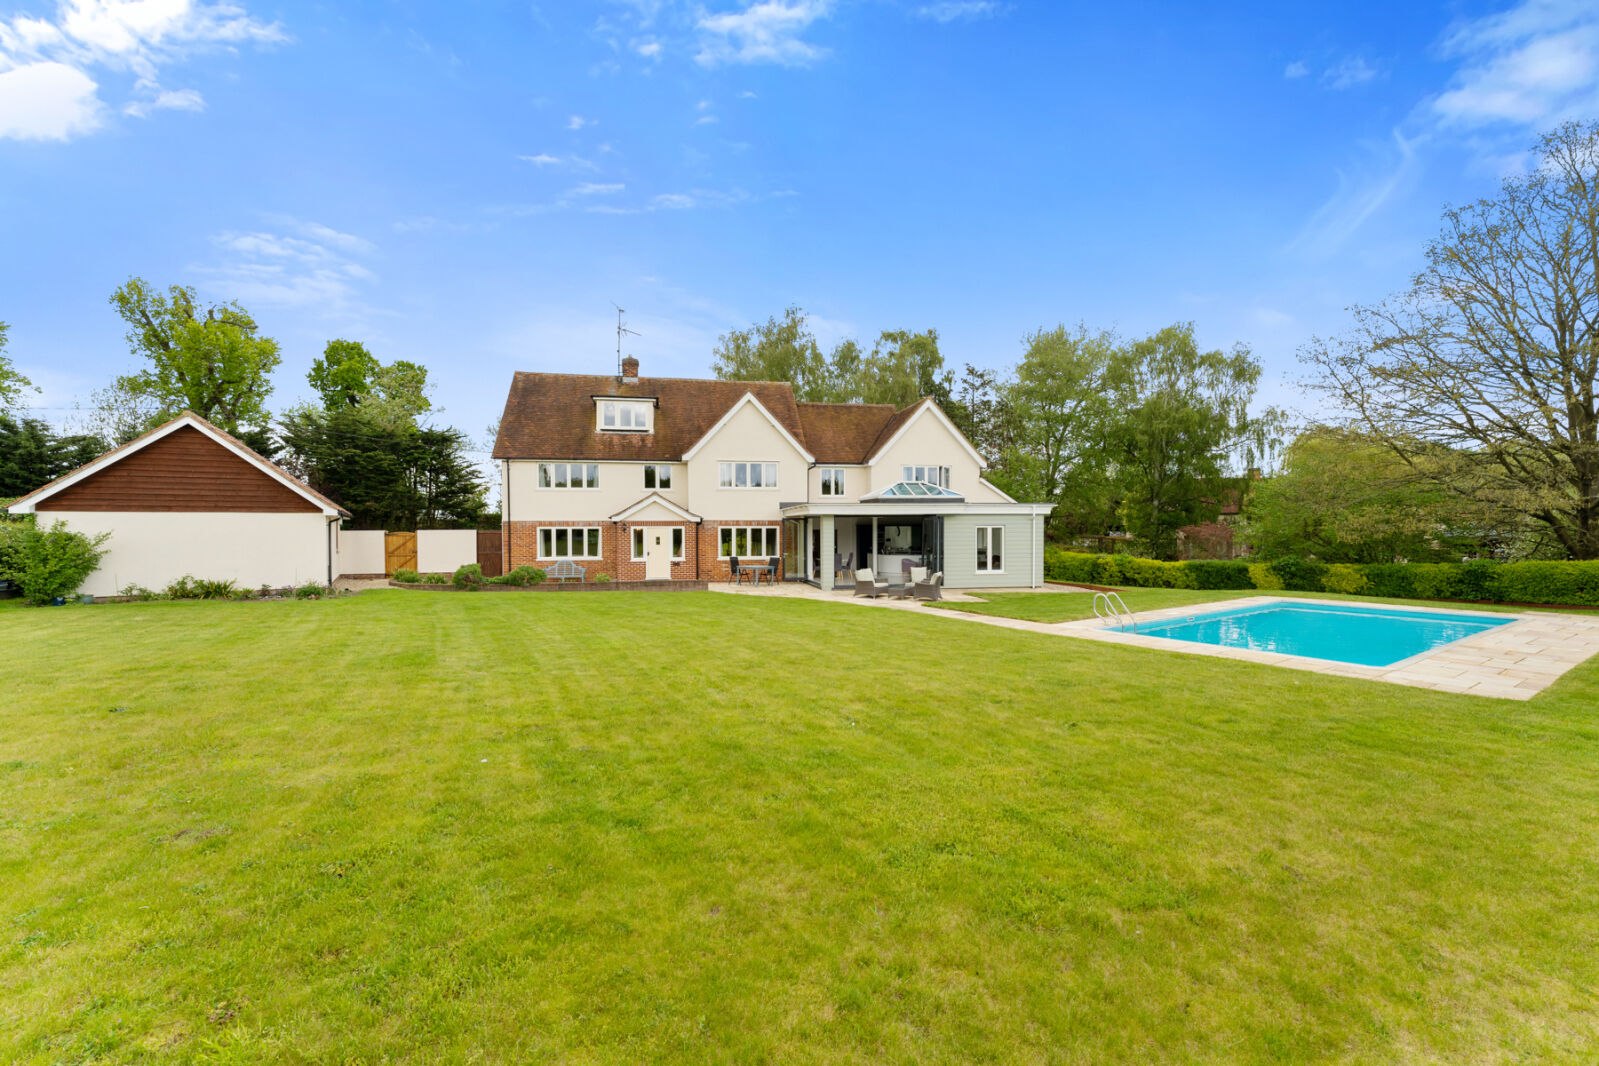 5 bedroom detached house for sale Newton Hall Chase, Dunmow, CM6, main image